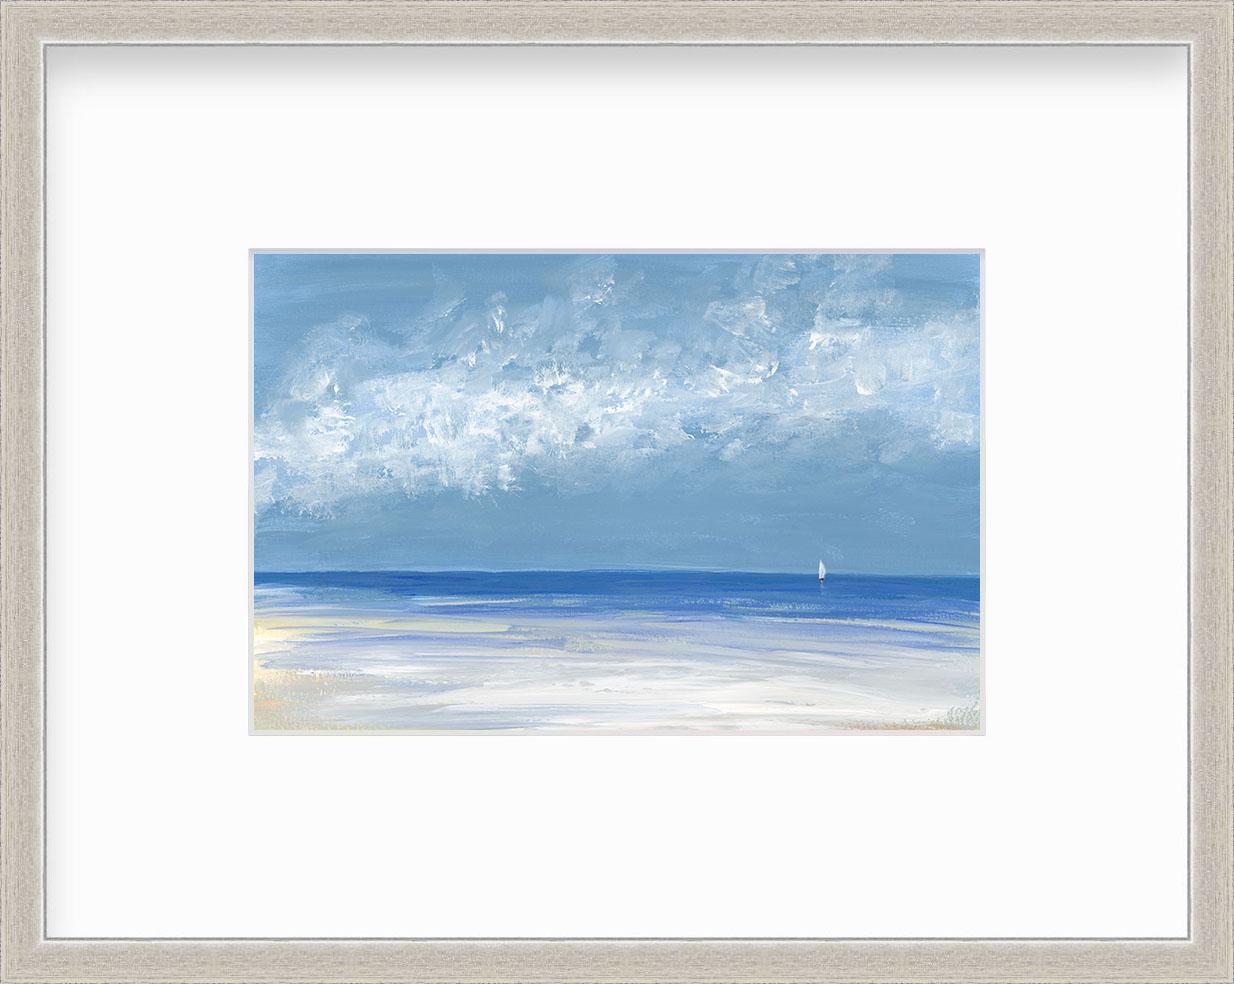 S. Cora Aldo Landscape Print - "Clear Day, " Framed Limited Edition Giclee Print, 16" x 24"